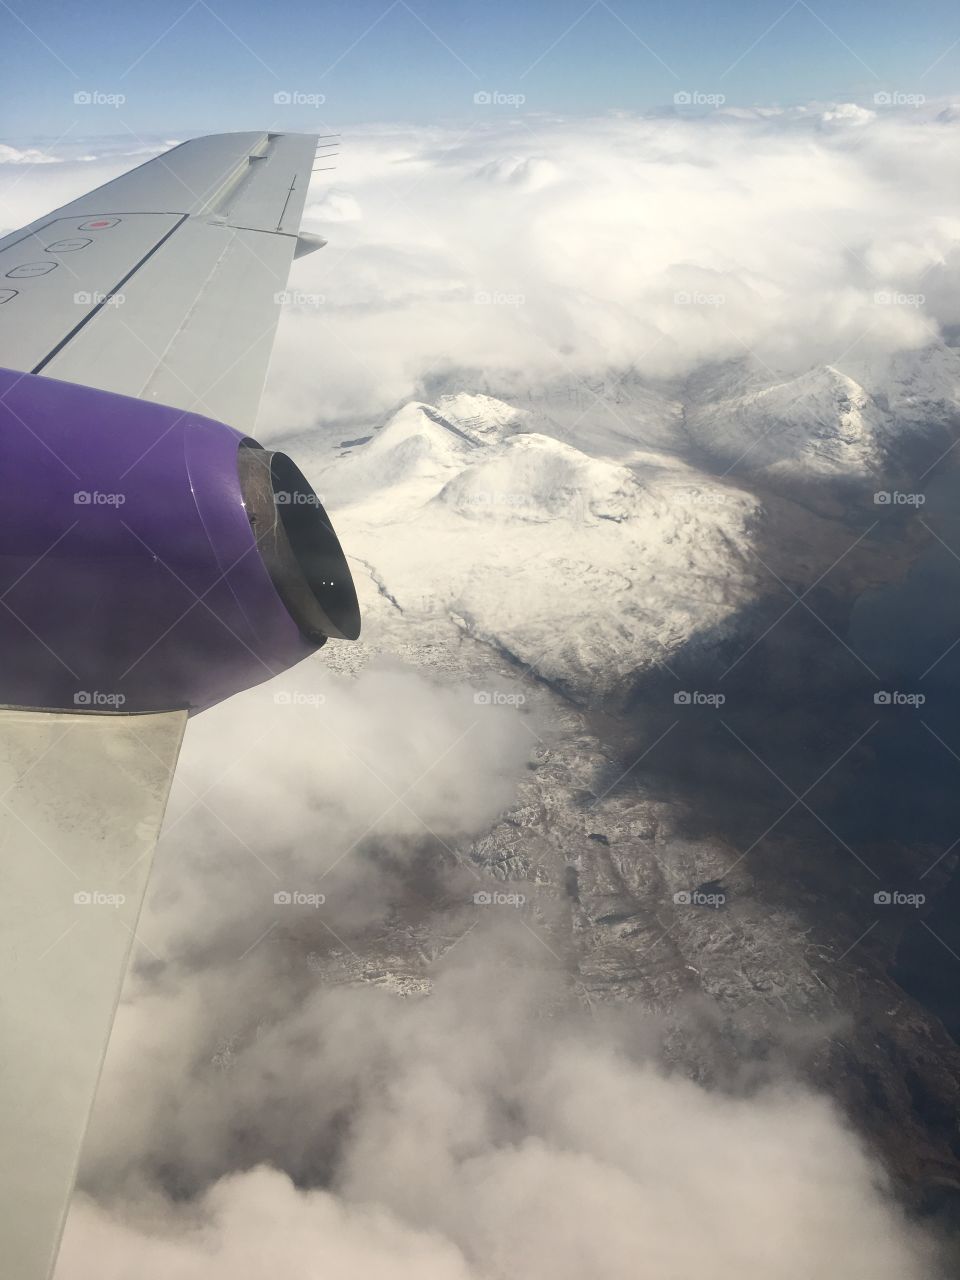 Snowy hills from plane